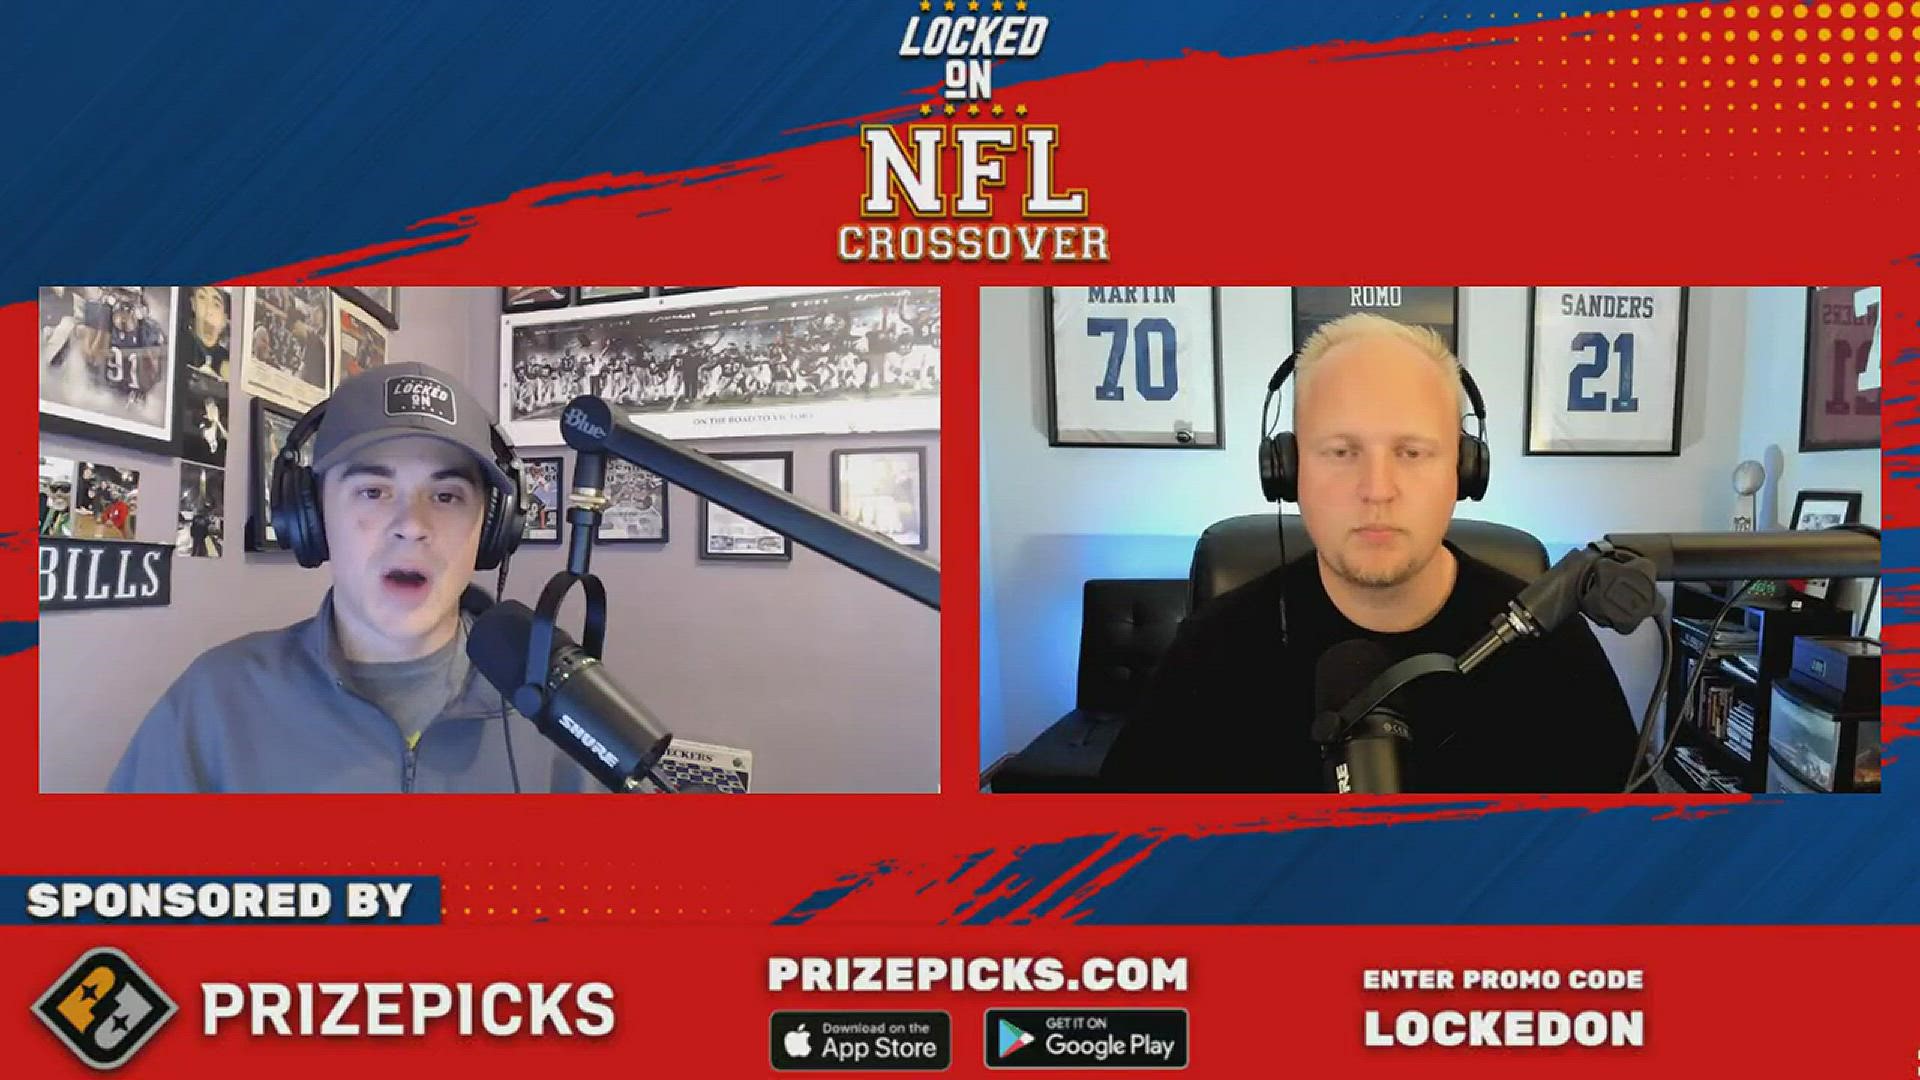 Locked On Cowboys host Marcus Mosher is joined by Louie DiBiase to discuss the Week 6 matchup between the Dallas Cowboys and the Philadelphia Eagles.